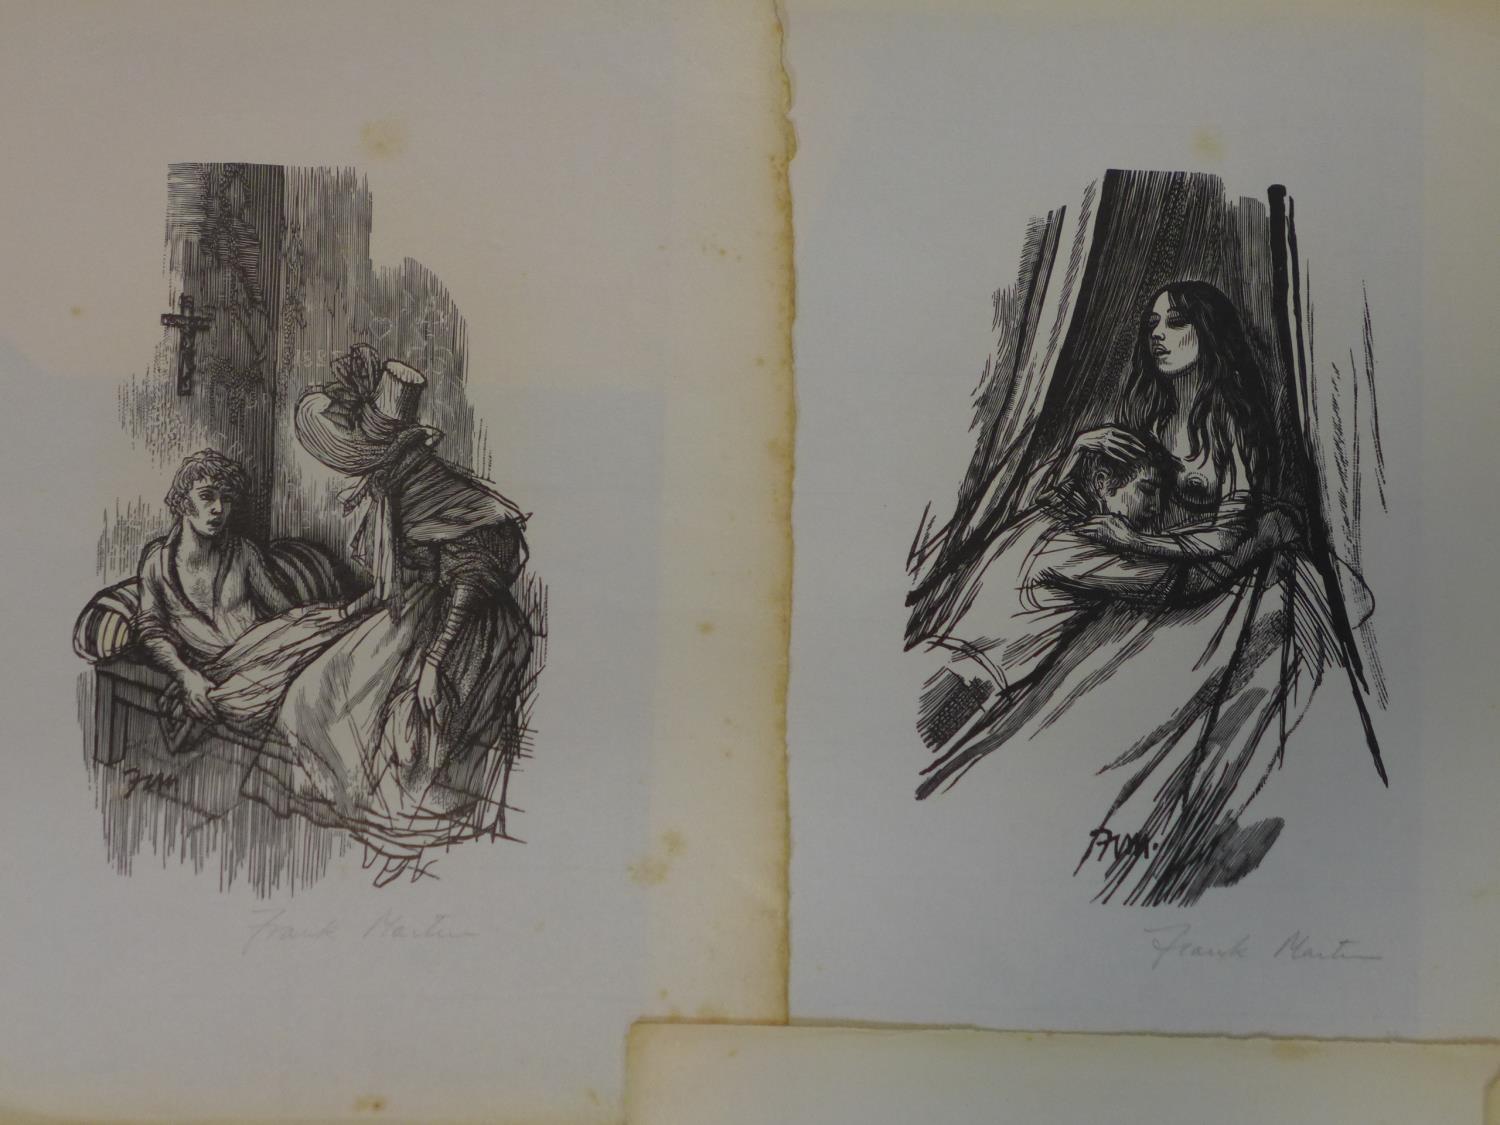 Wood Engravings by Frank Martin for Stendhal's 'Scarlet and Black', a series of 13 engravings - Image 2 of 7